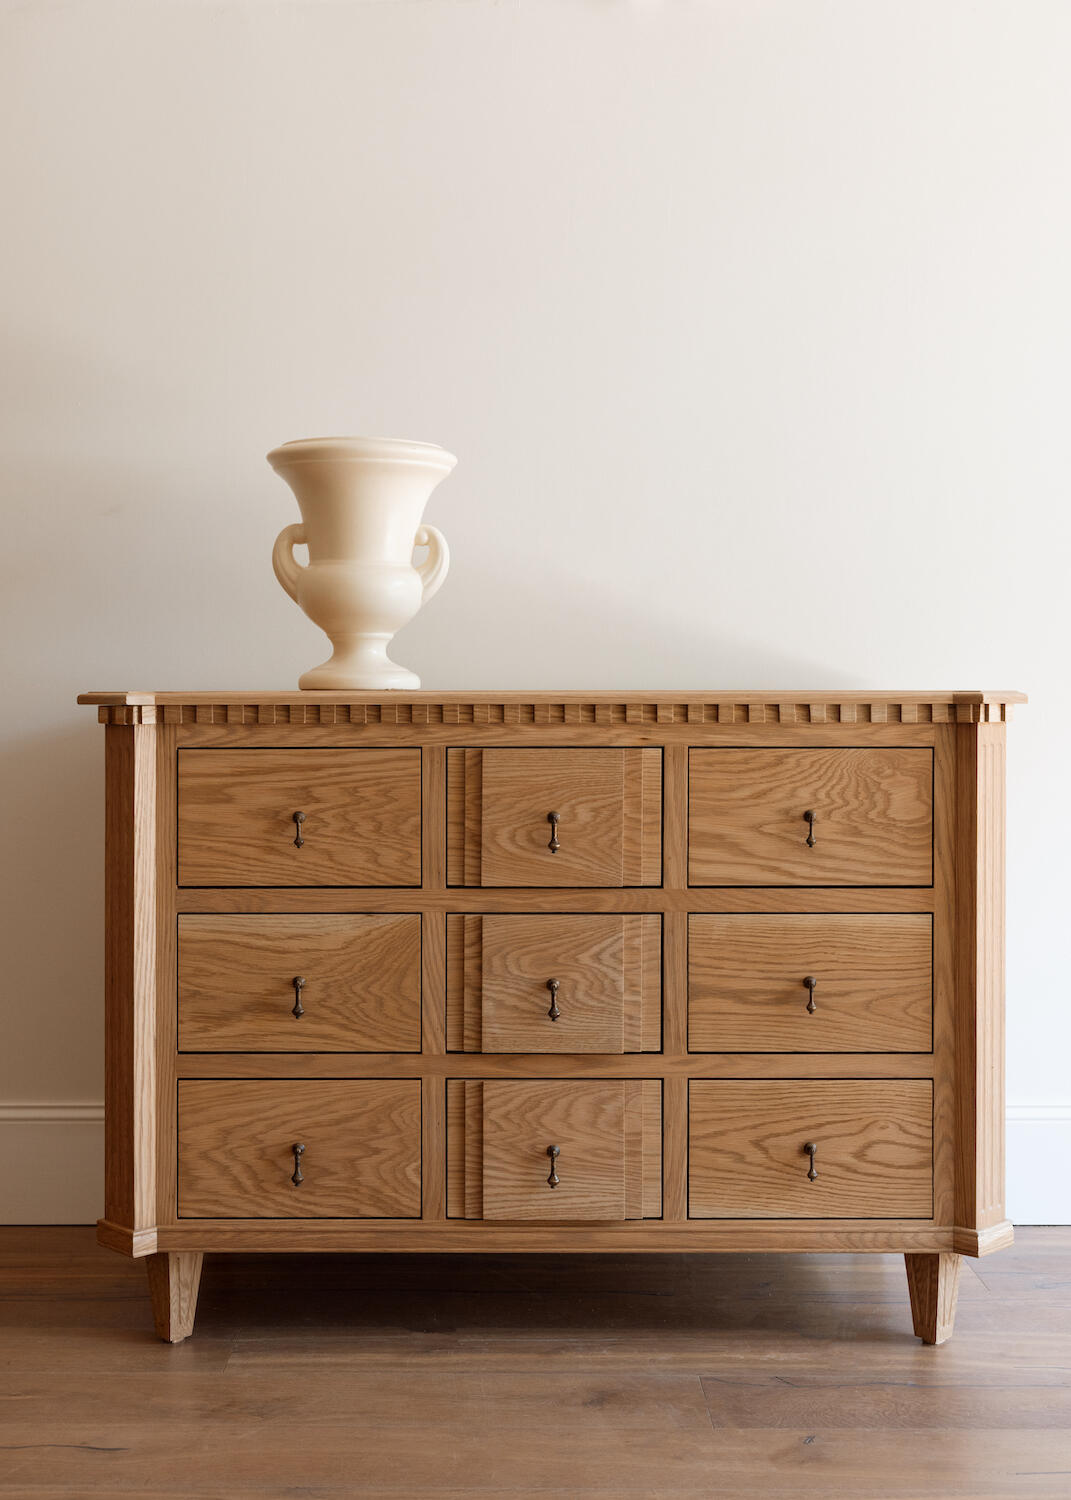 The Domus chest by AK Collective